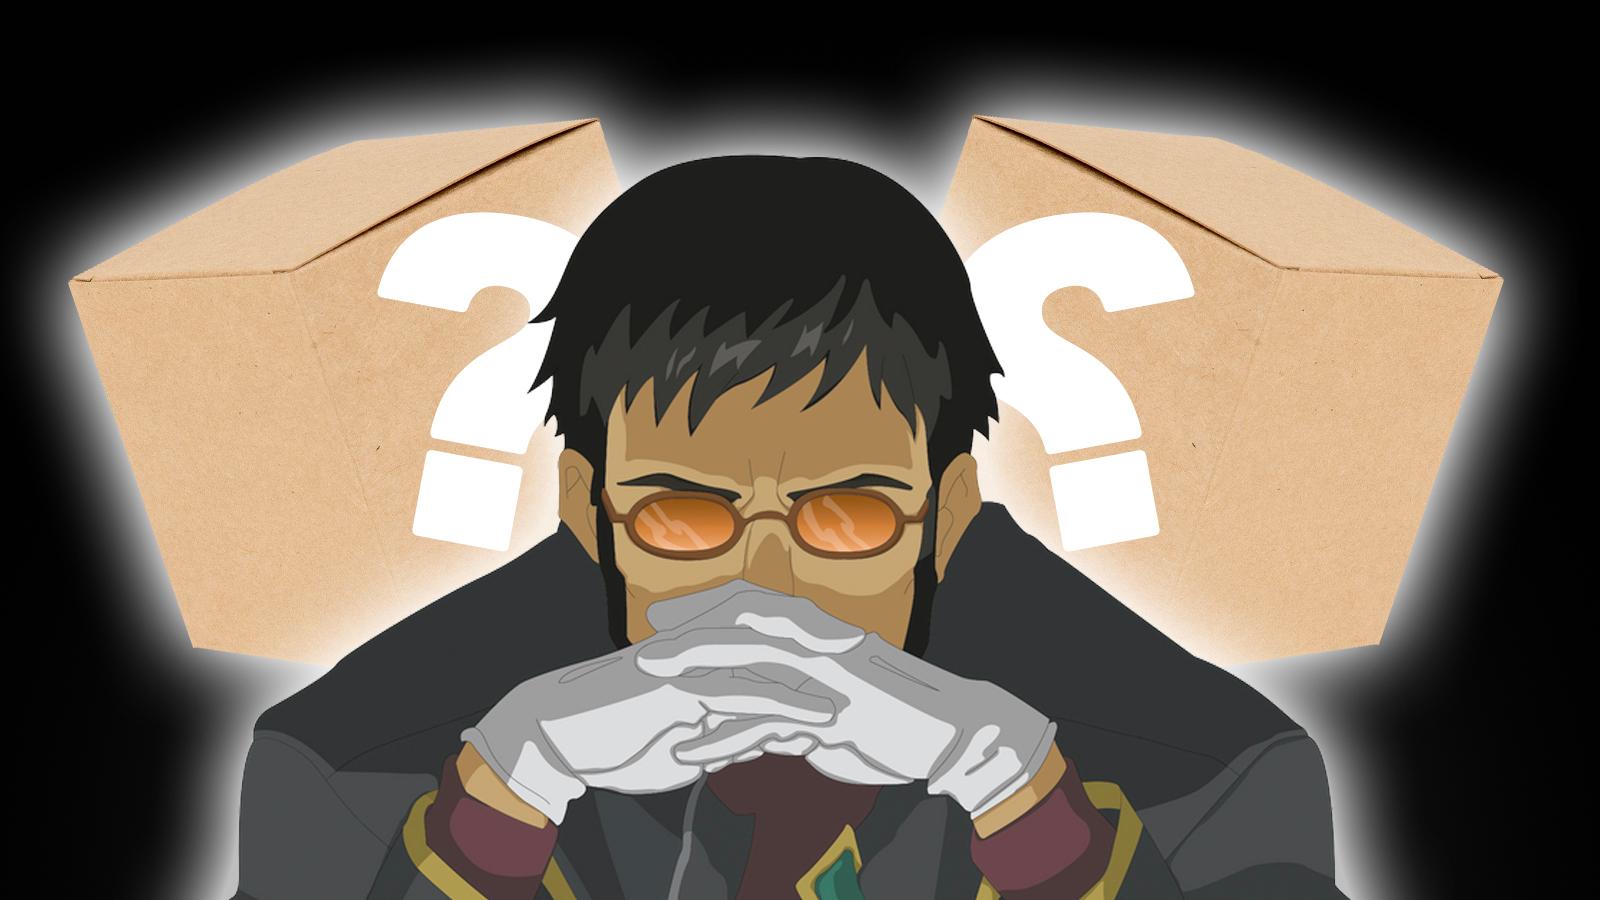 gendo in front of two boxes meant to represent the new evangelion blind boxes